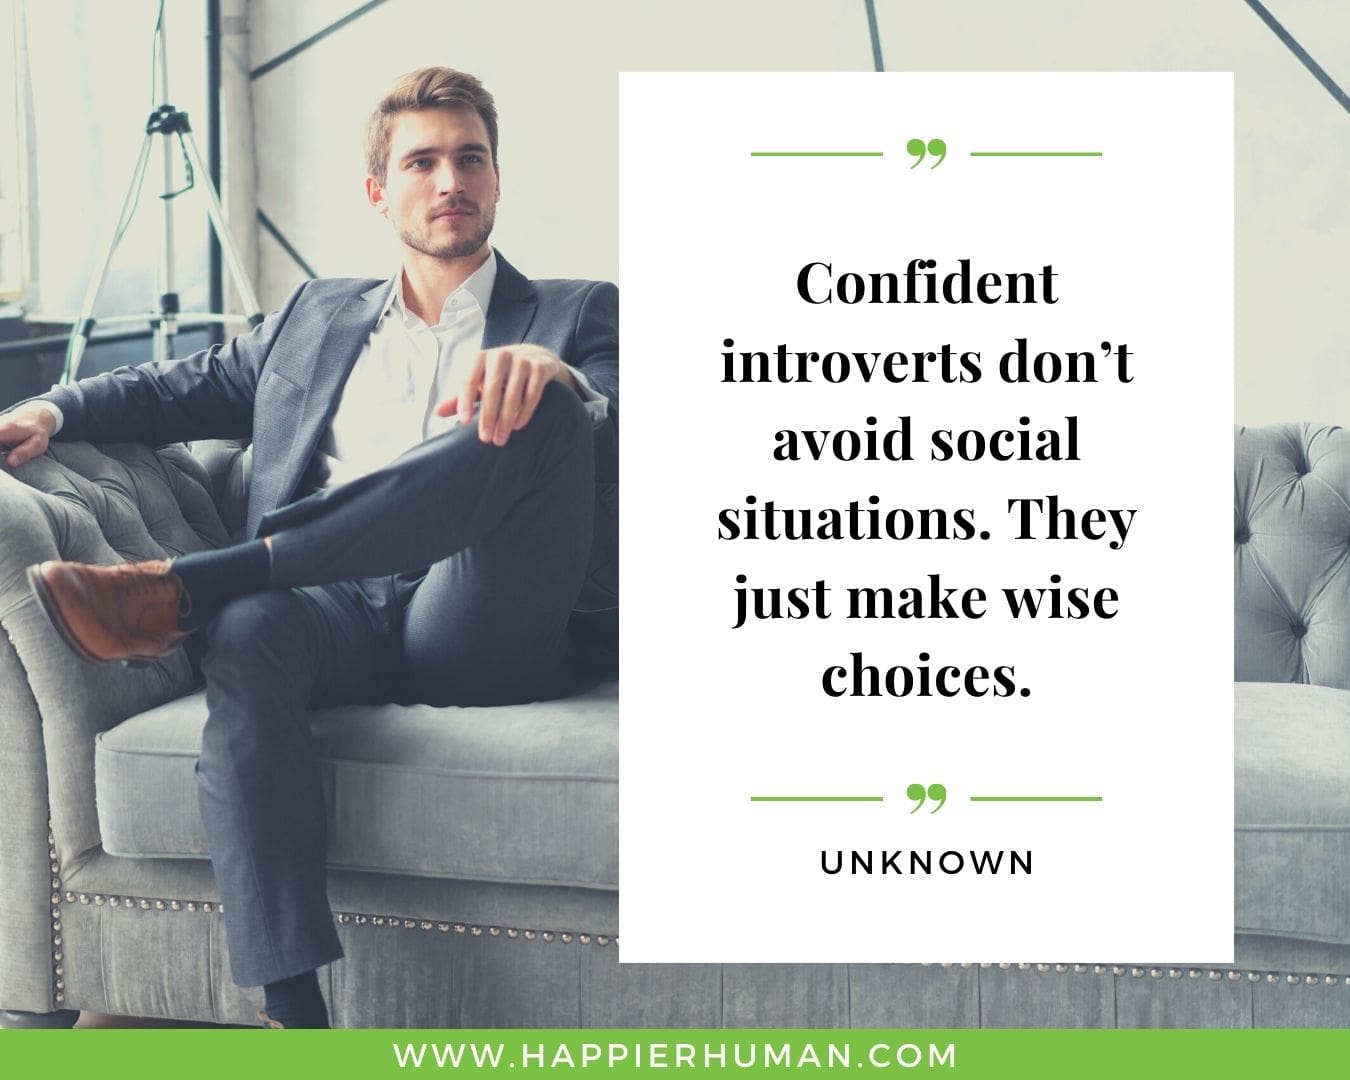 Introvert Quotes - “Confident introverts don’t avoid social situations. They just make wise choices.” – Unknown